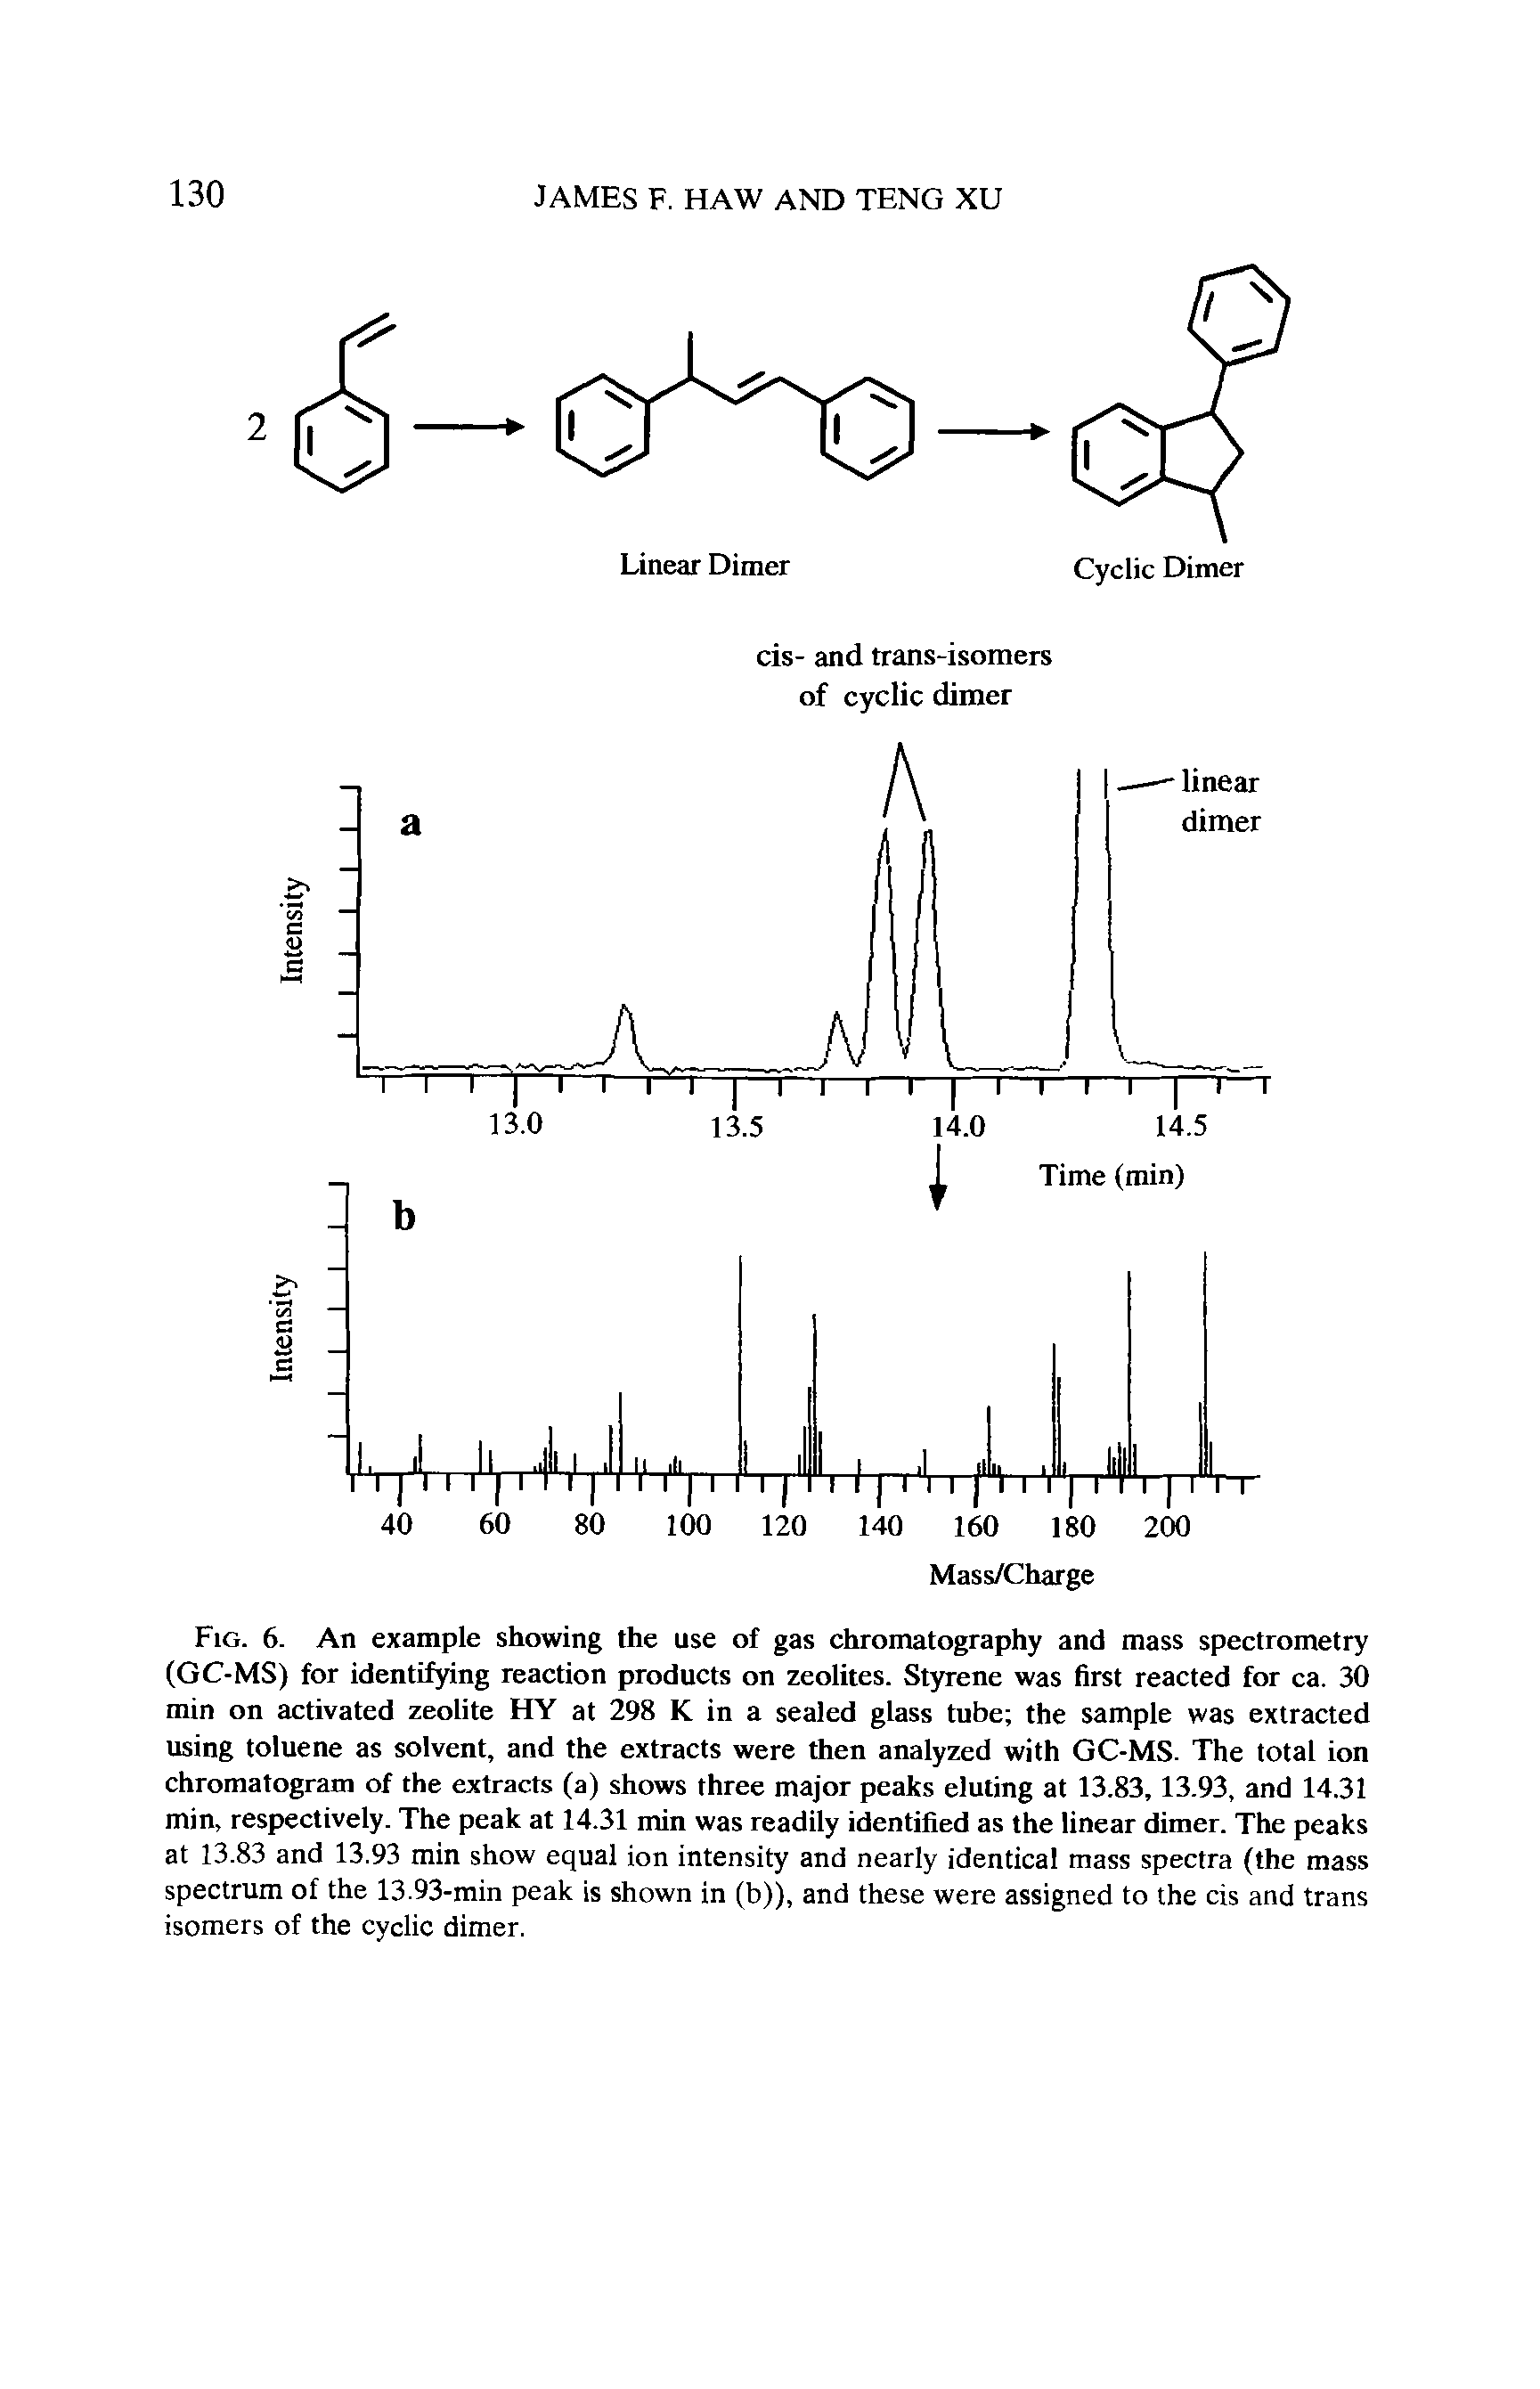 Fig. 6. An example showing the use of gas chromatography and mass spectrometry (GC-MS) for identifying reaction products on zeolites. Styrene was first reacted for ca. 30 min on activated zeolite HY at 298 K in a sealed glass tube the sample was extracted using toluene as solvent, and the extracts were then analyzed with GC-MS. The total ion chromatogram of the extracts (a) shows three major peaks eluting at 13.83, 13.93, and 14.31 min, respectively. The peak at 14.31 min was readily identified as the linear dimer. The peaks at 13.83 and 13.93 min show equal ion intensity and nearly identical mass spectra (the mass spectrum of the 13.93-min peak is shown in (b)), and these were assigned to the cis and trans isomers of the cyclic dimer.